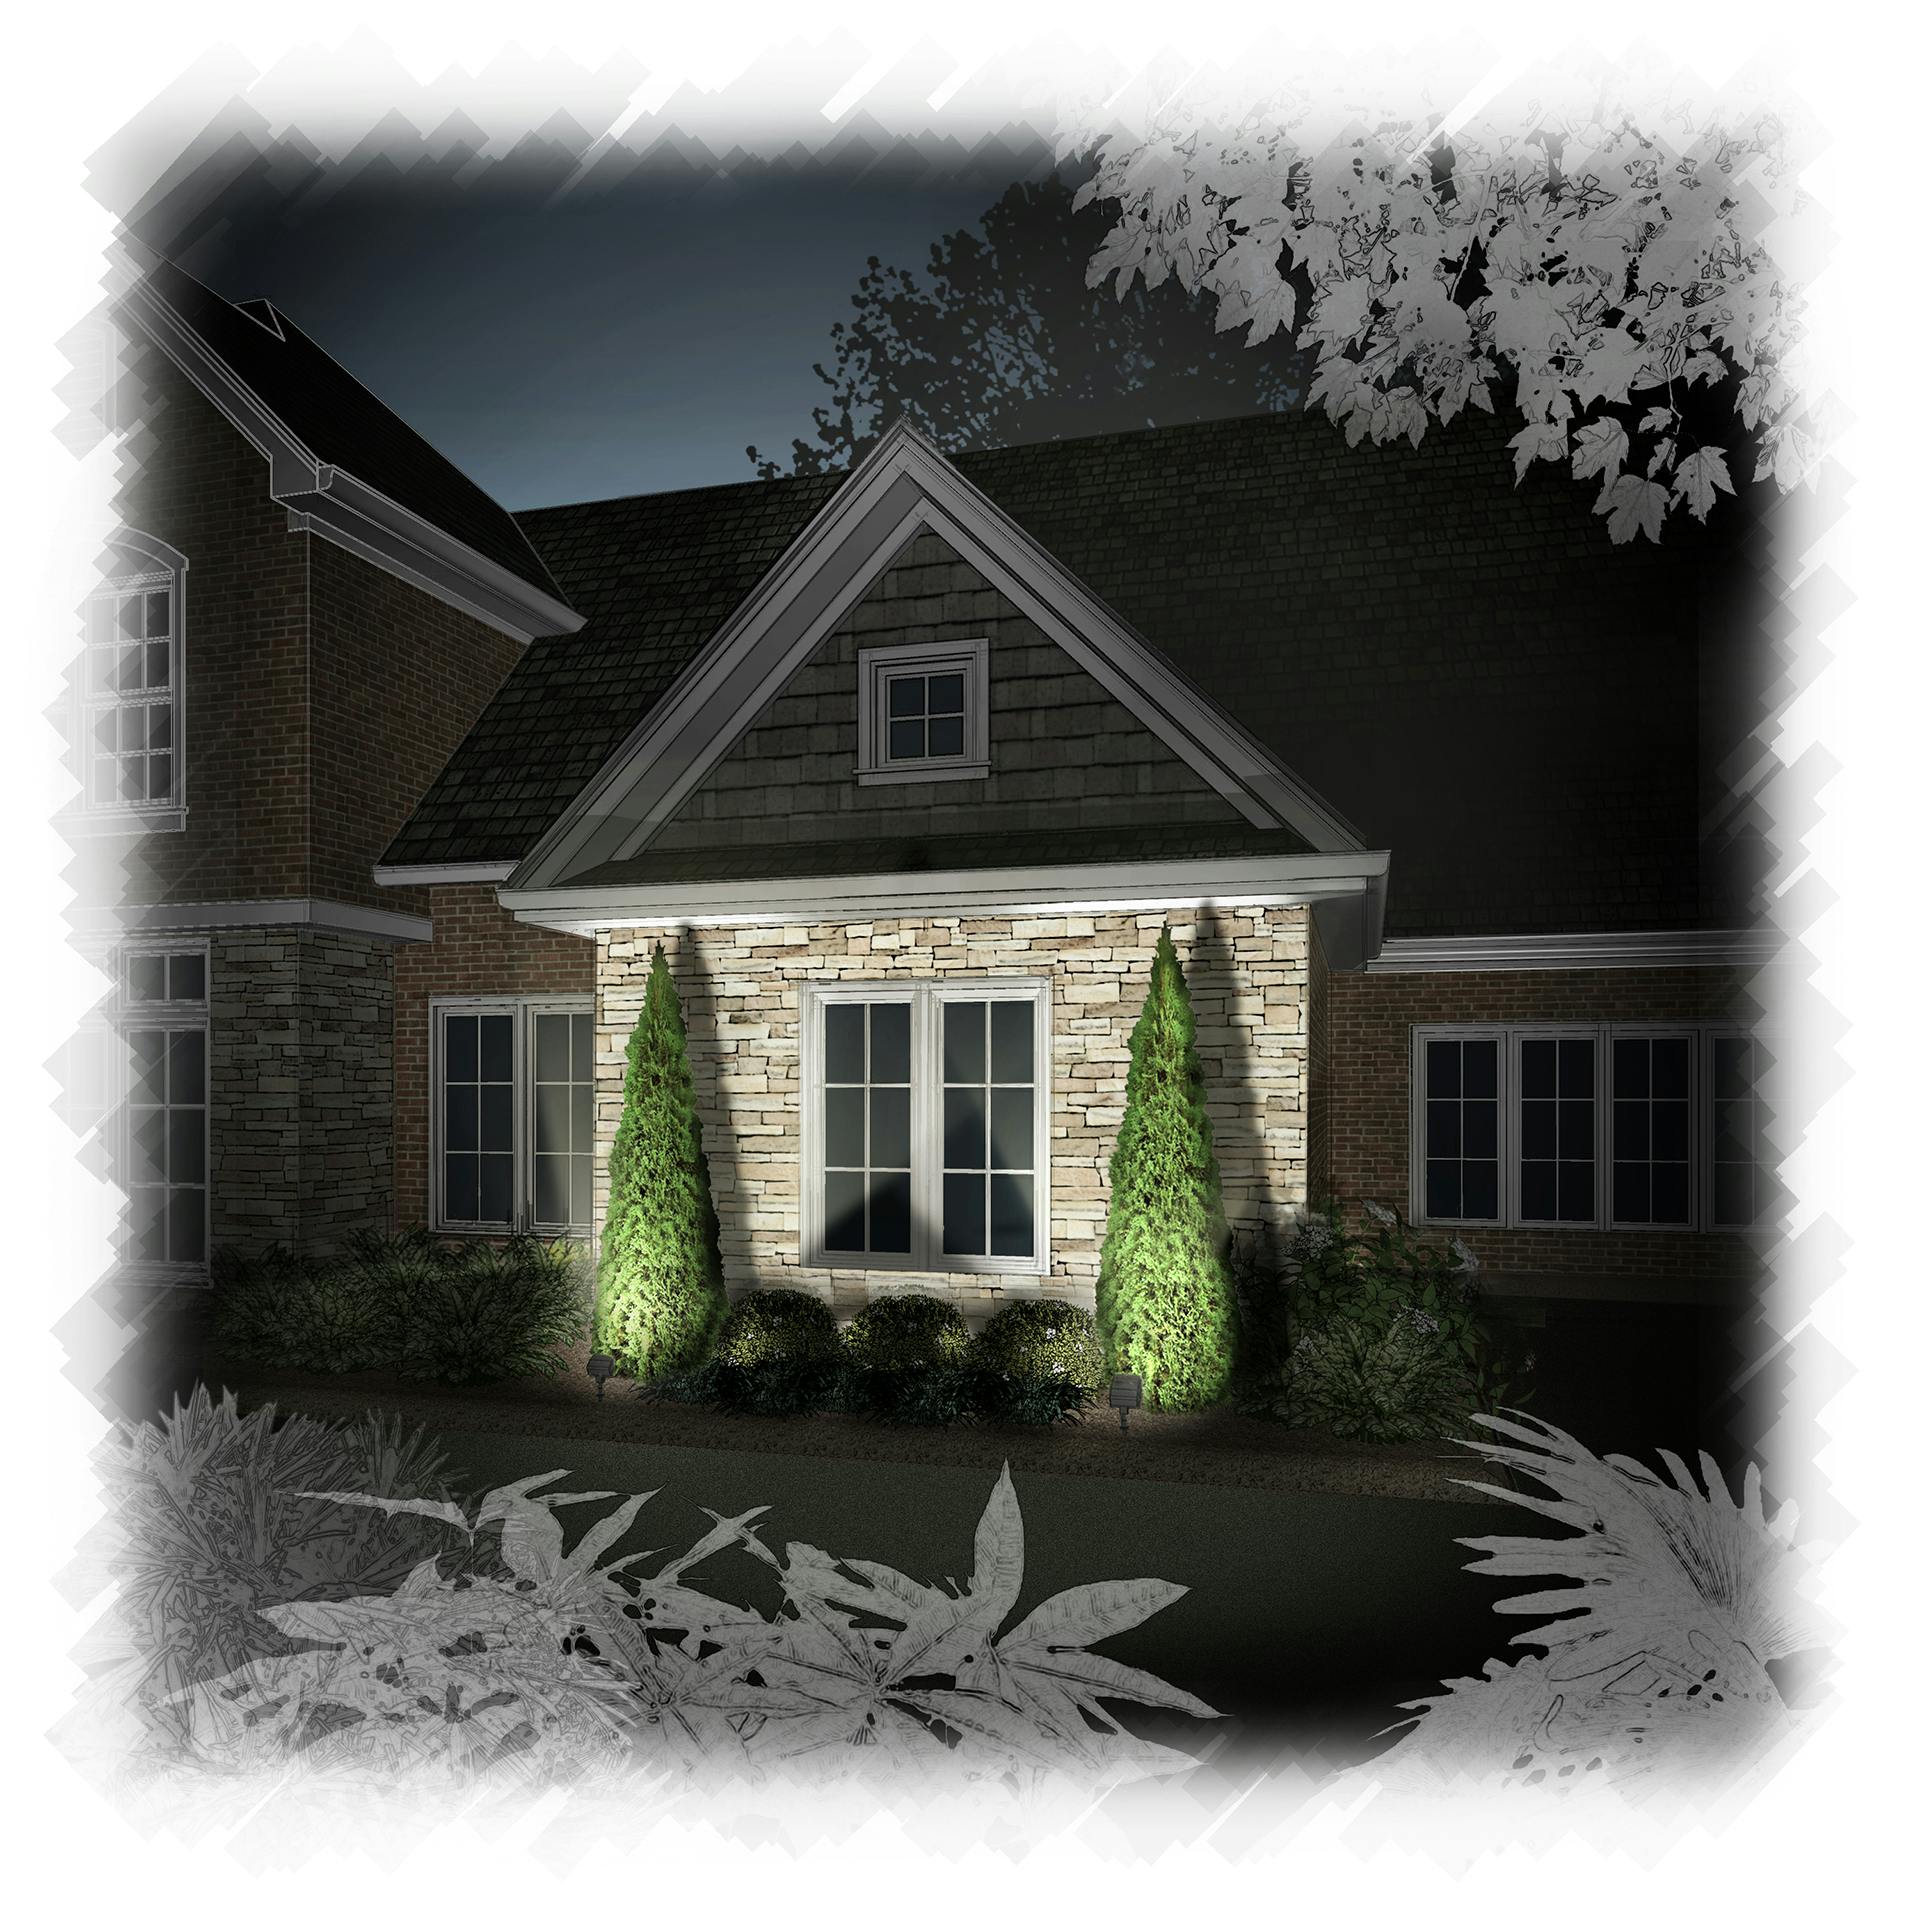 Illustration of an exterior home with lights shining directly on tall shrubs